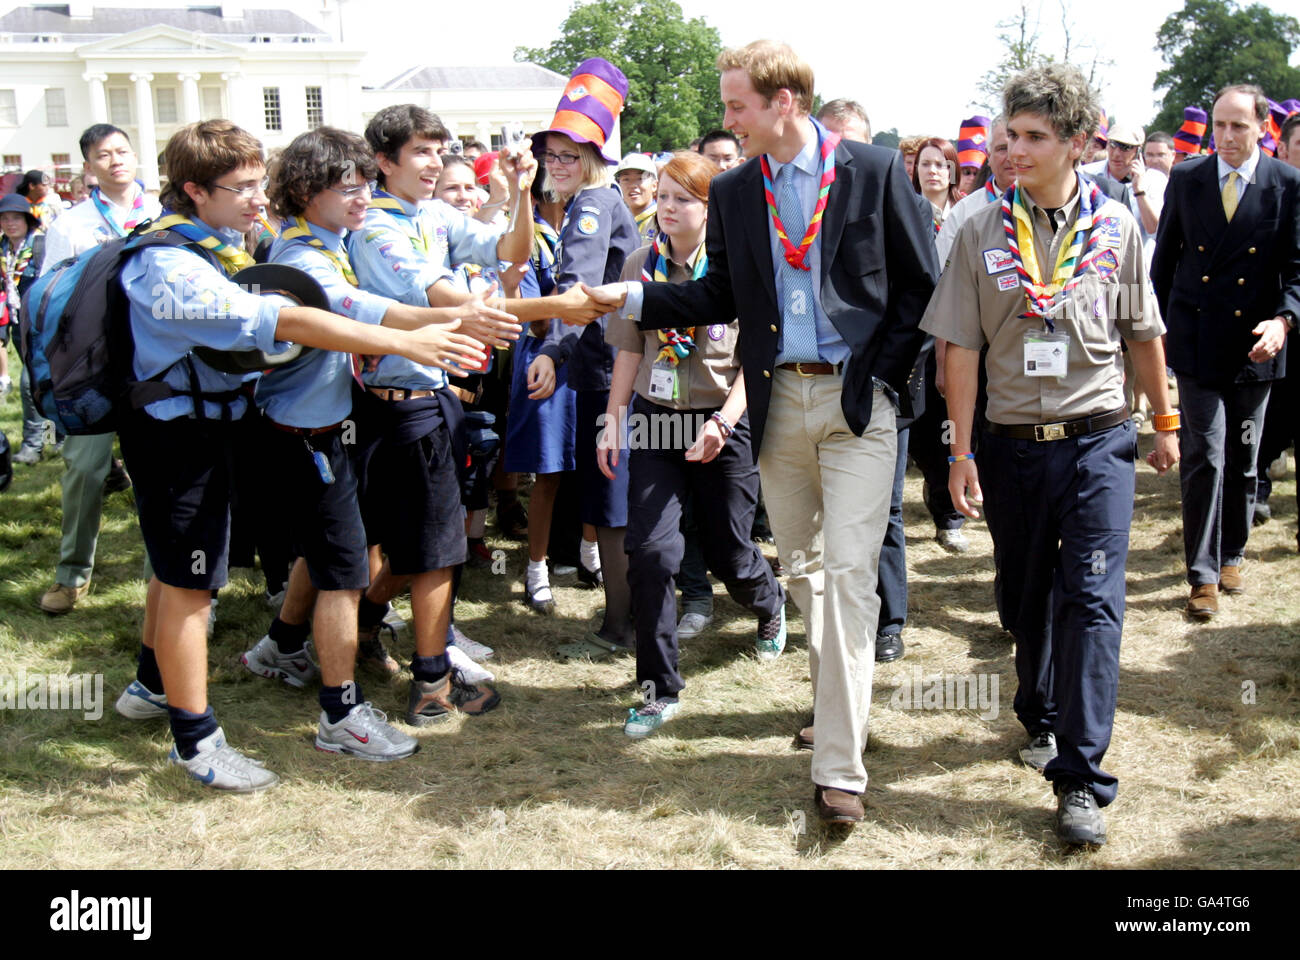 HRH Prince William attends the opening ceremony for the 21st World Scout Jamboree at Hylands Park, Chelmsford, Essex. Stock Photo